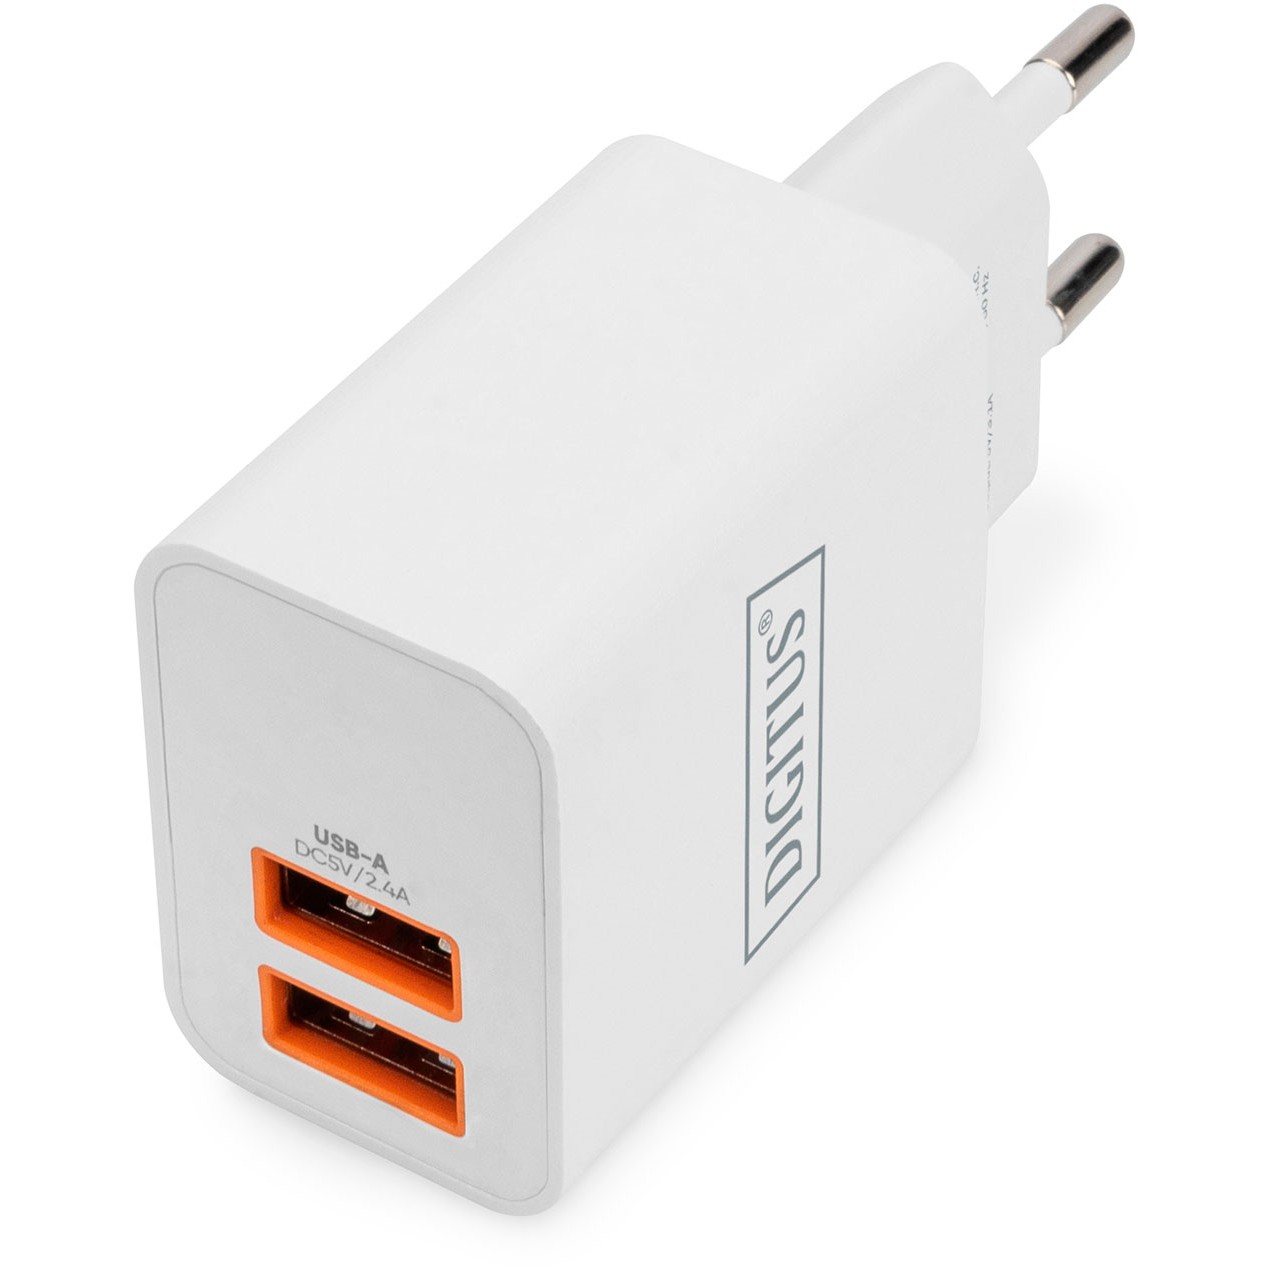 Digitus DA-10061 mobile device charger